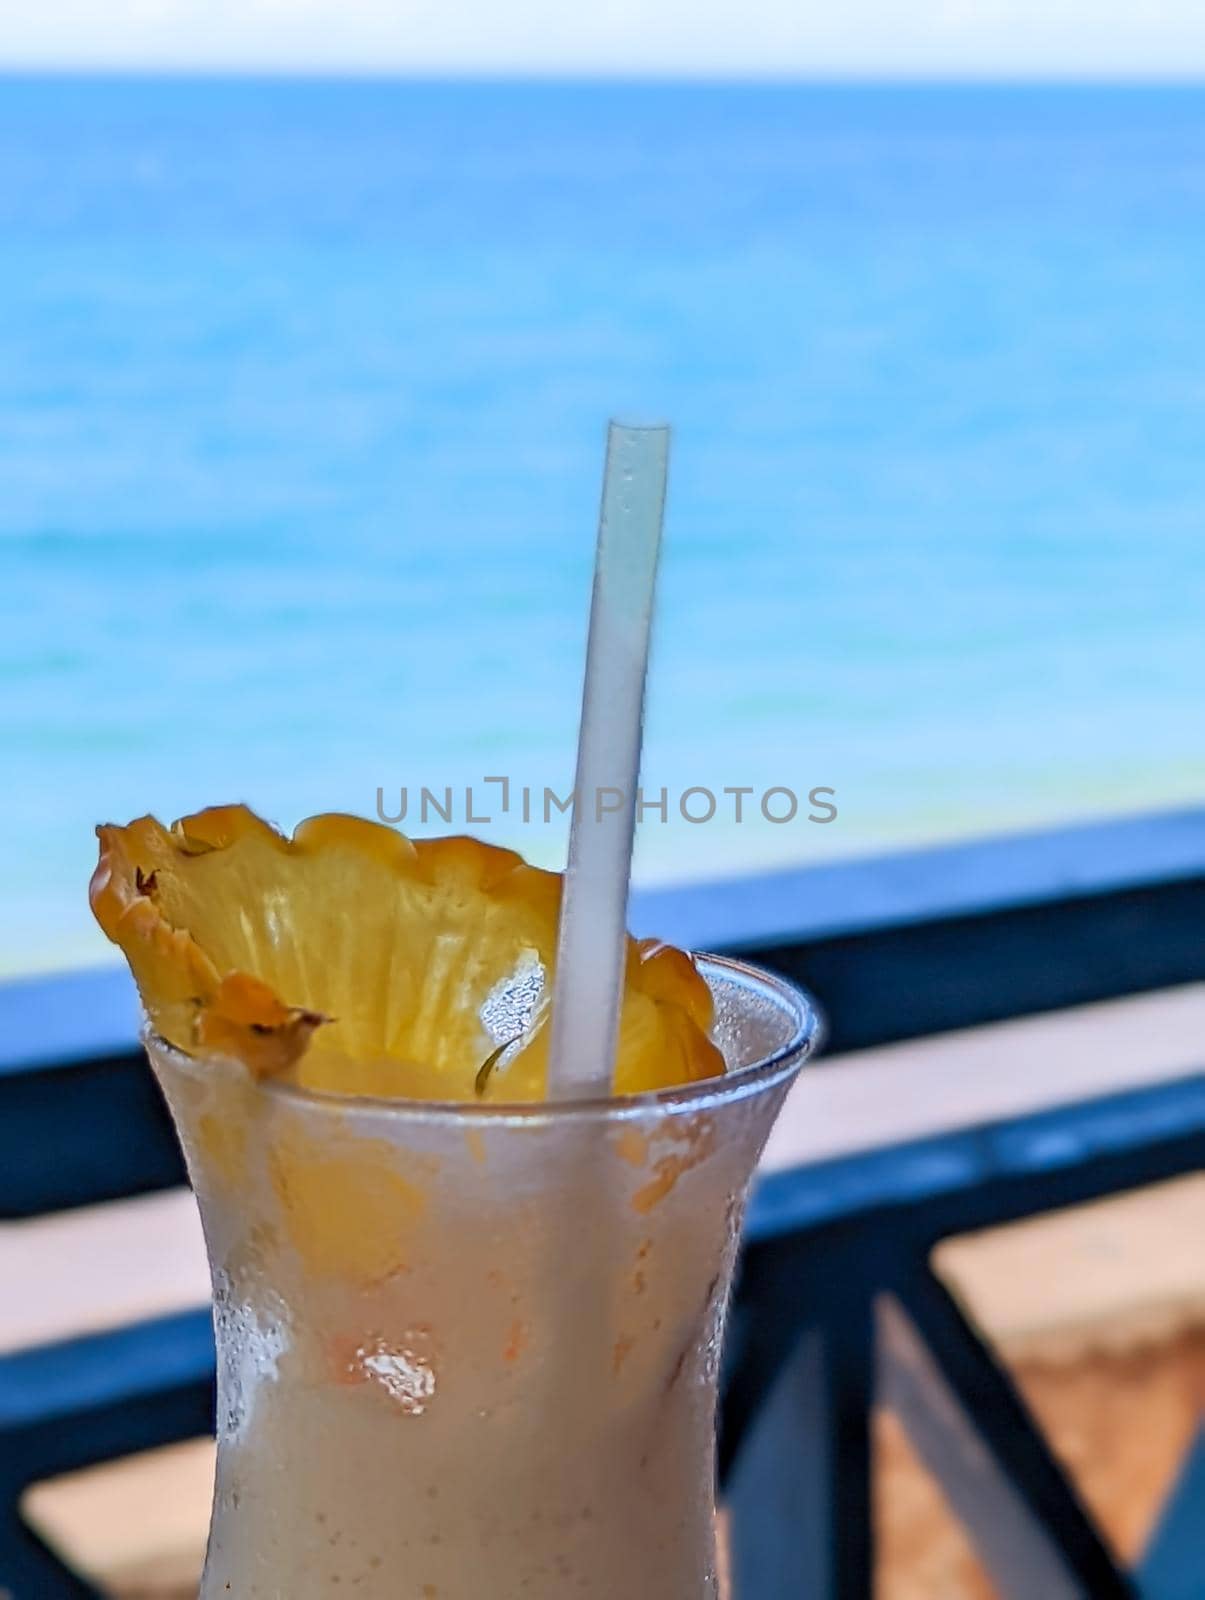 enjoying a dringk and a view of beach in oahu hawaii by digidreamgrafix